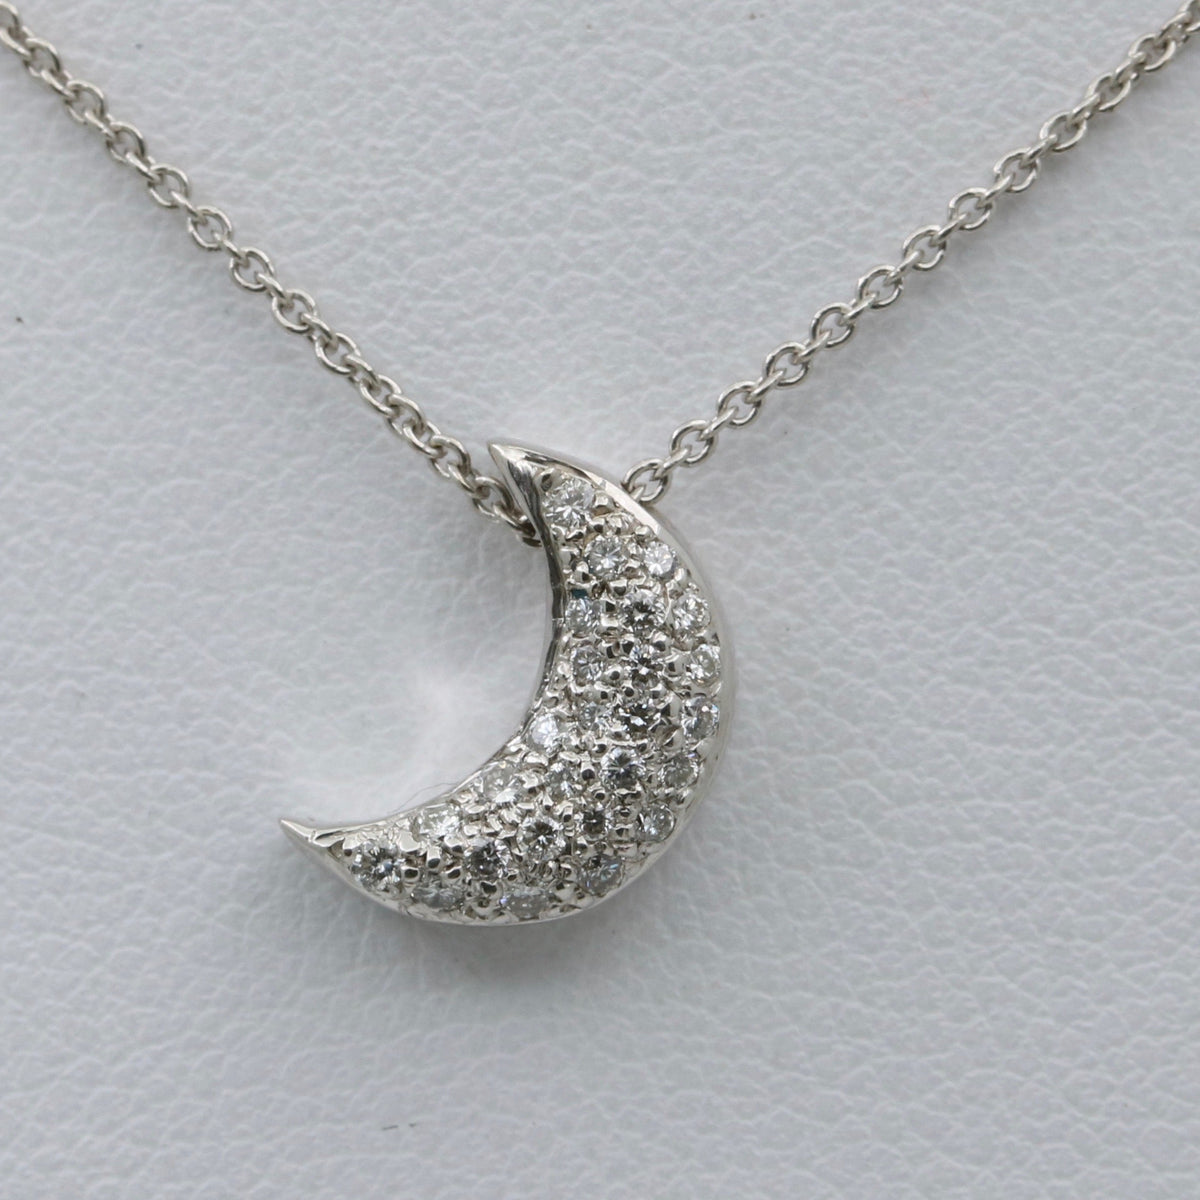 Diamond Crescent and 18K White Gold Necklace, 15.75” Long